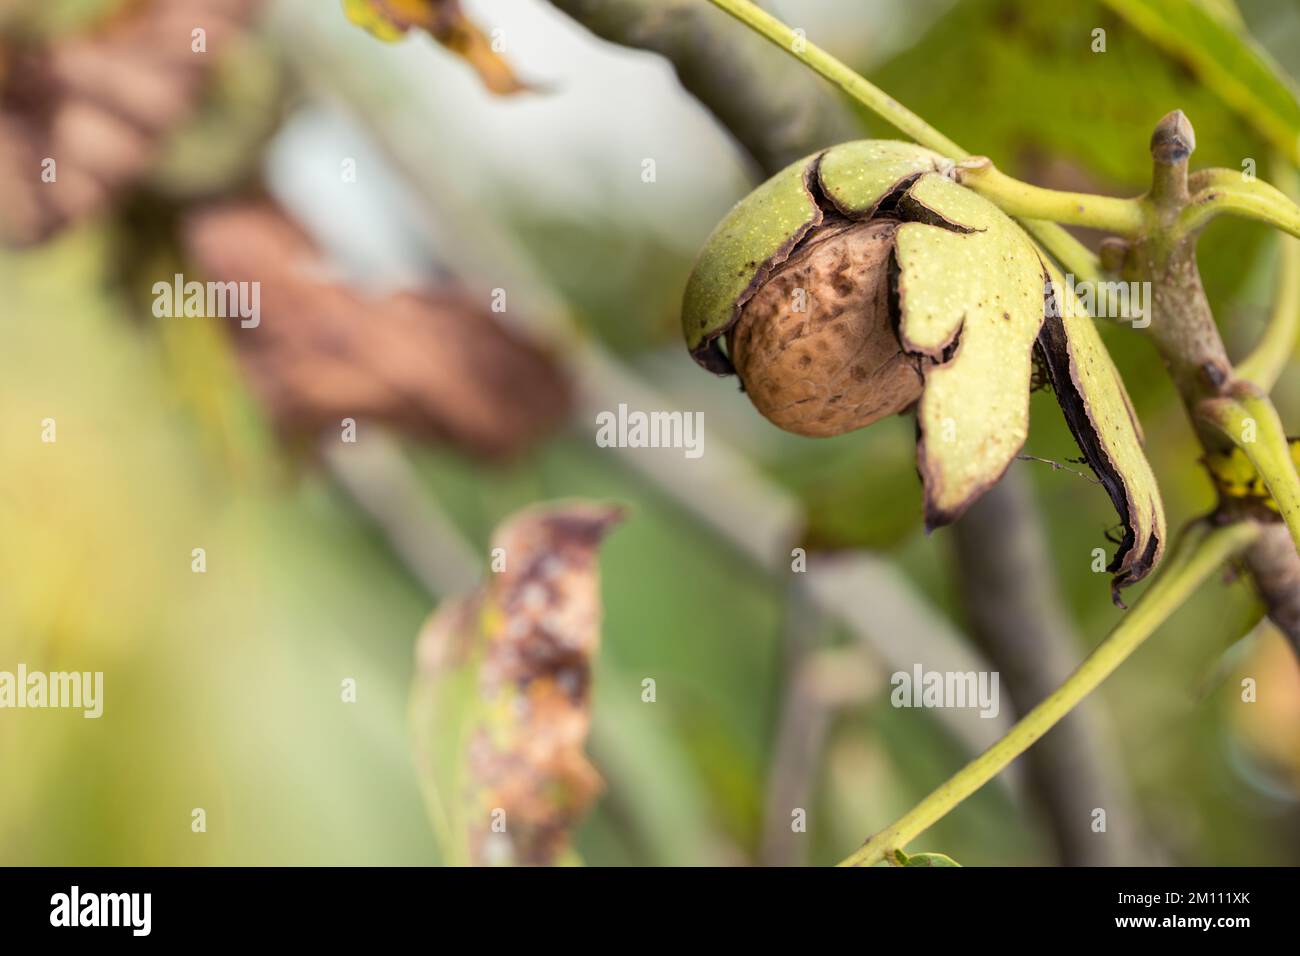 Ripe walnut in a shell on a tree branch. Stock Photo